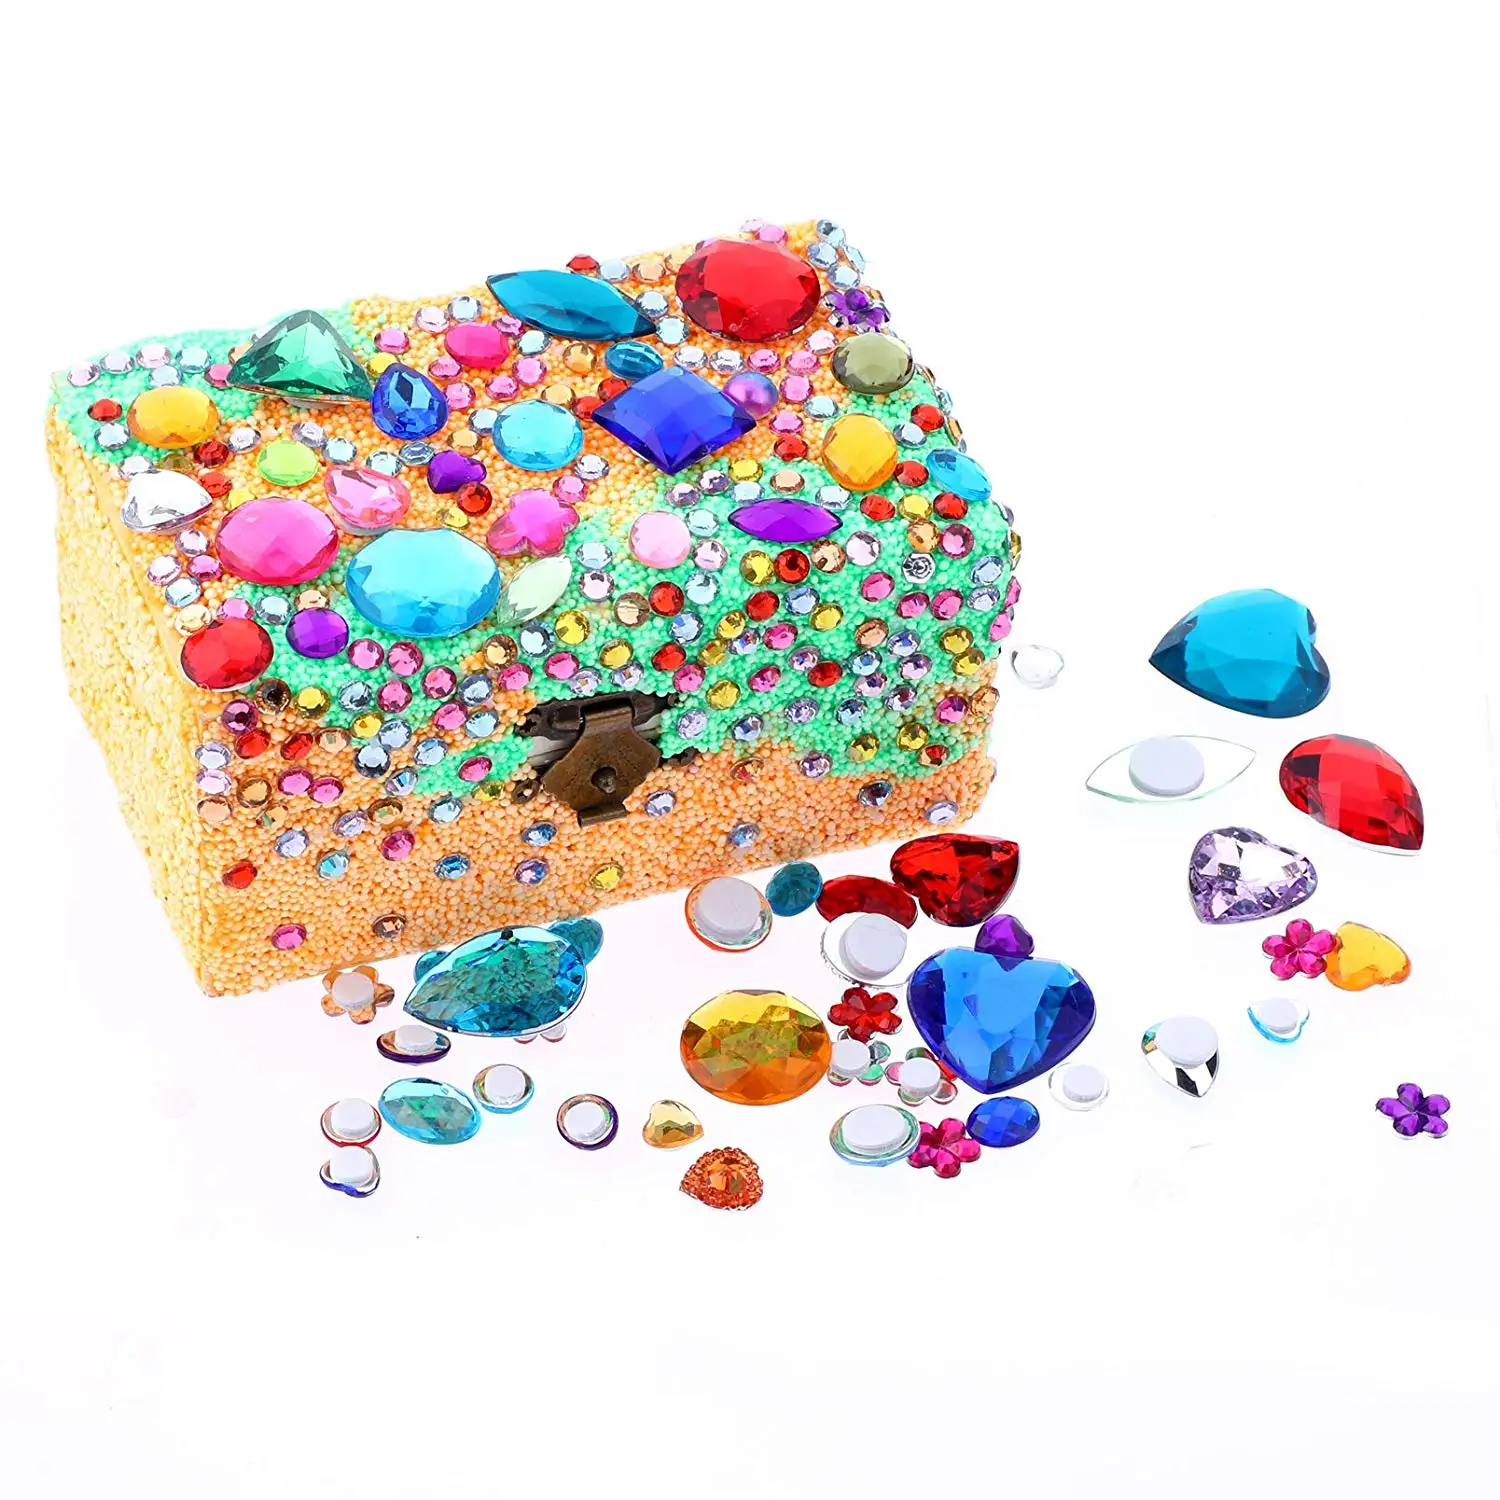 Self Adhesive Craft Jewels Jumbo Bling Crystal Gem Stickers Assorted Shapes Colors Rhinestone Stickers for Arts & Crafts Projects Pack of 110 